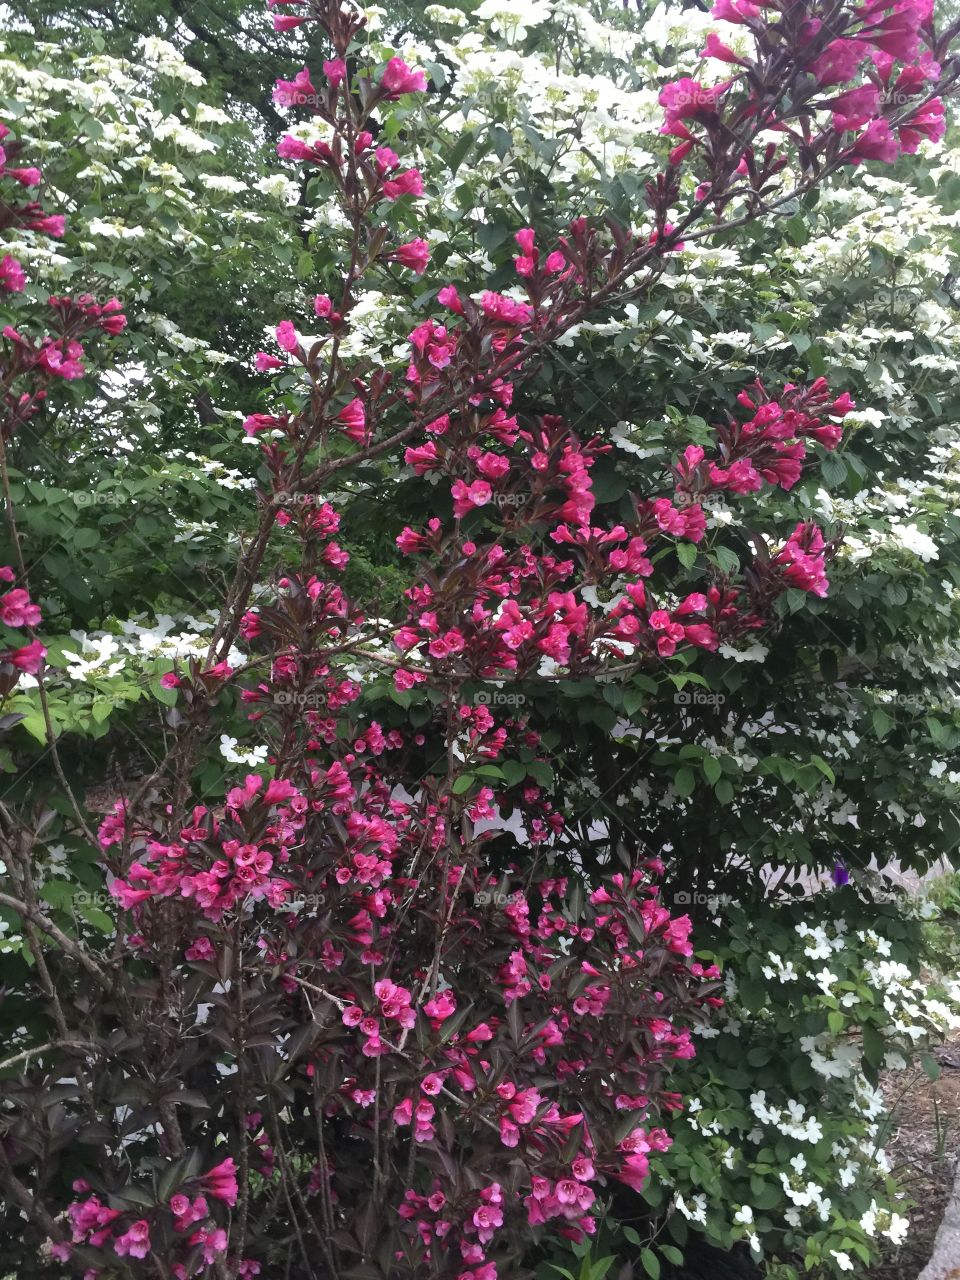 Bushes in bloom. Pink and white flowers on bushes